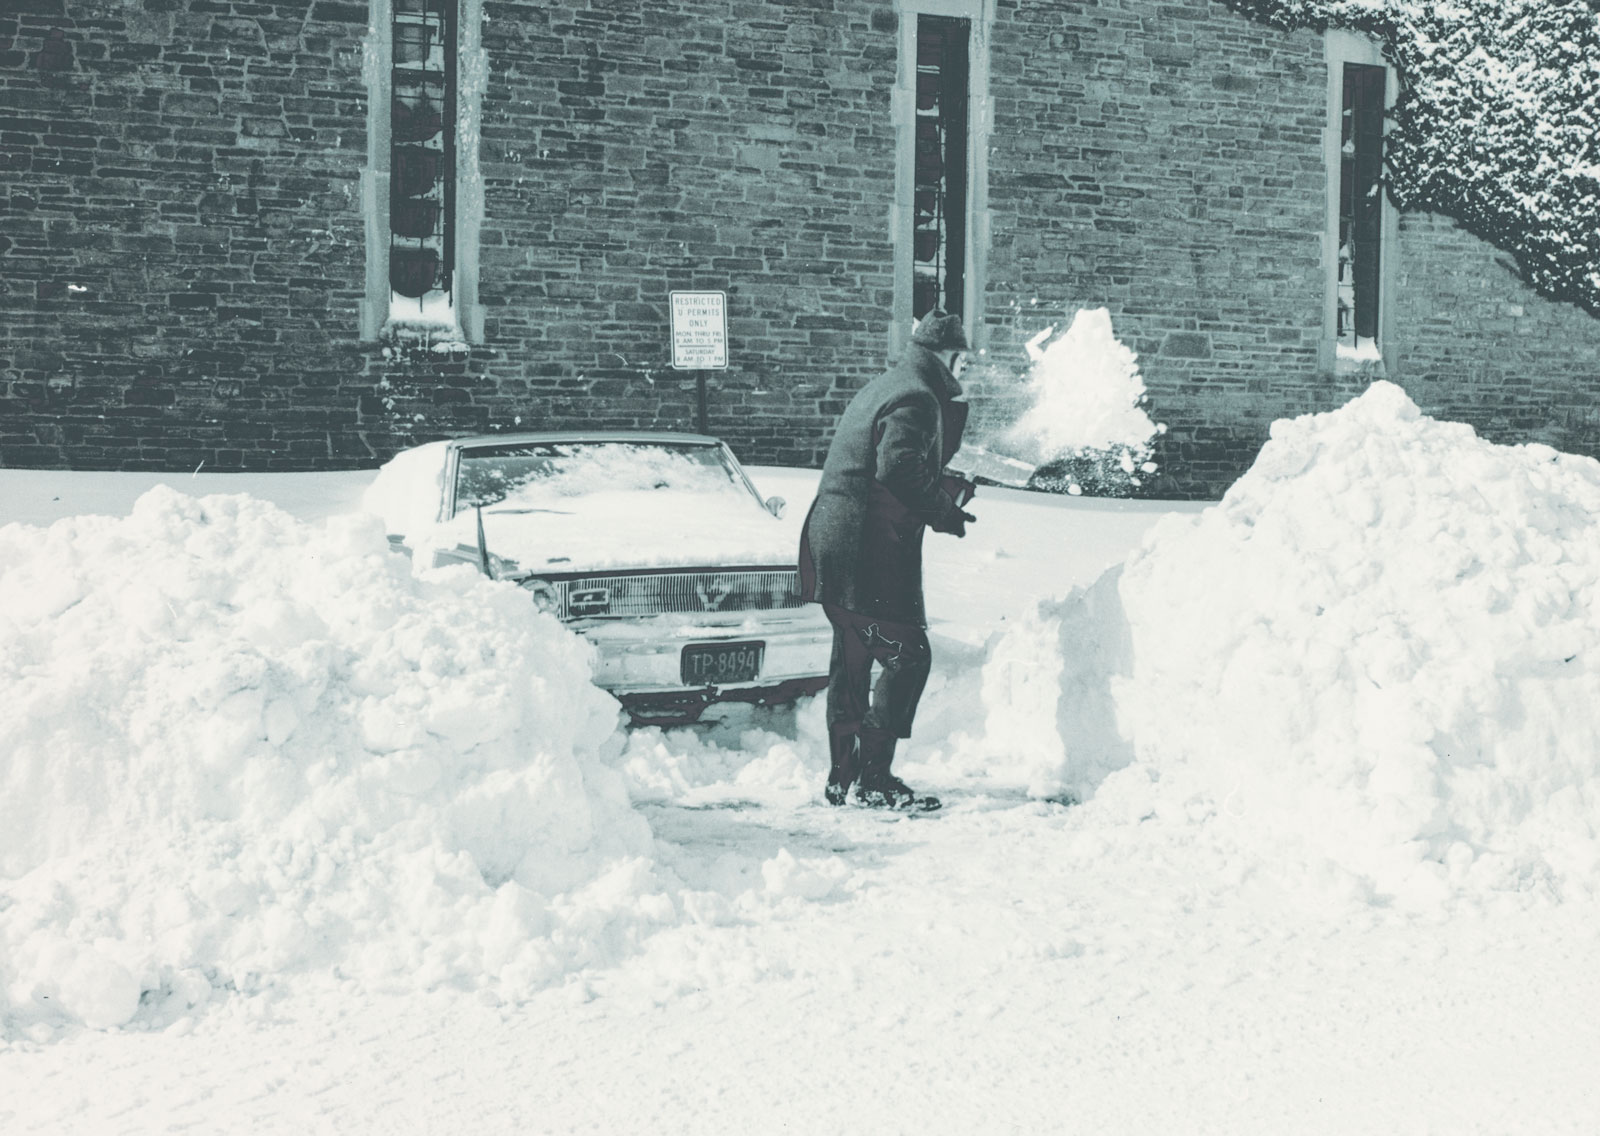 Shoveling out by Barton Hall, early 1970s